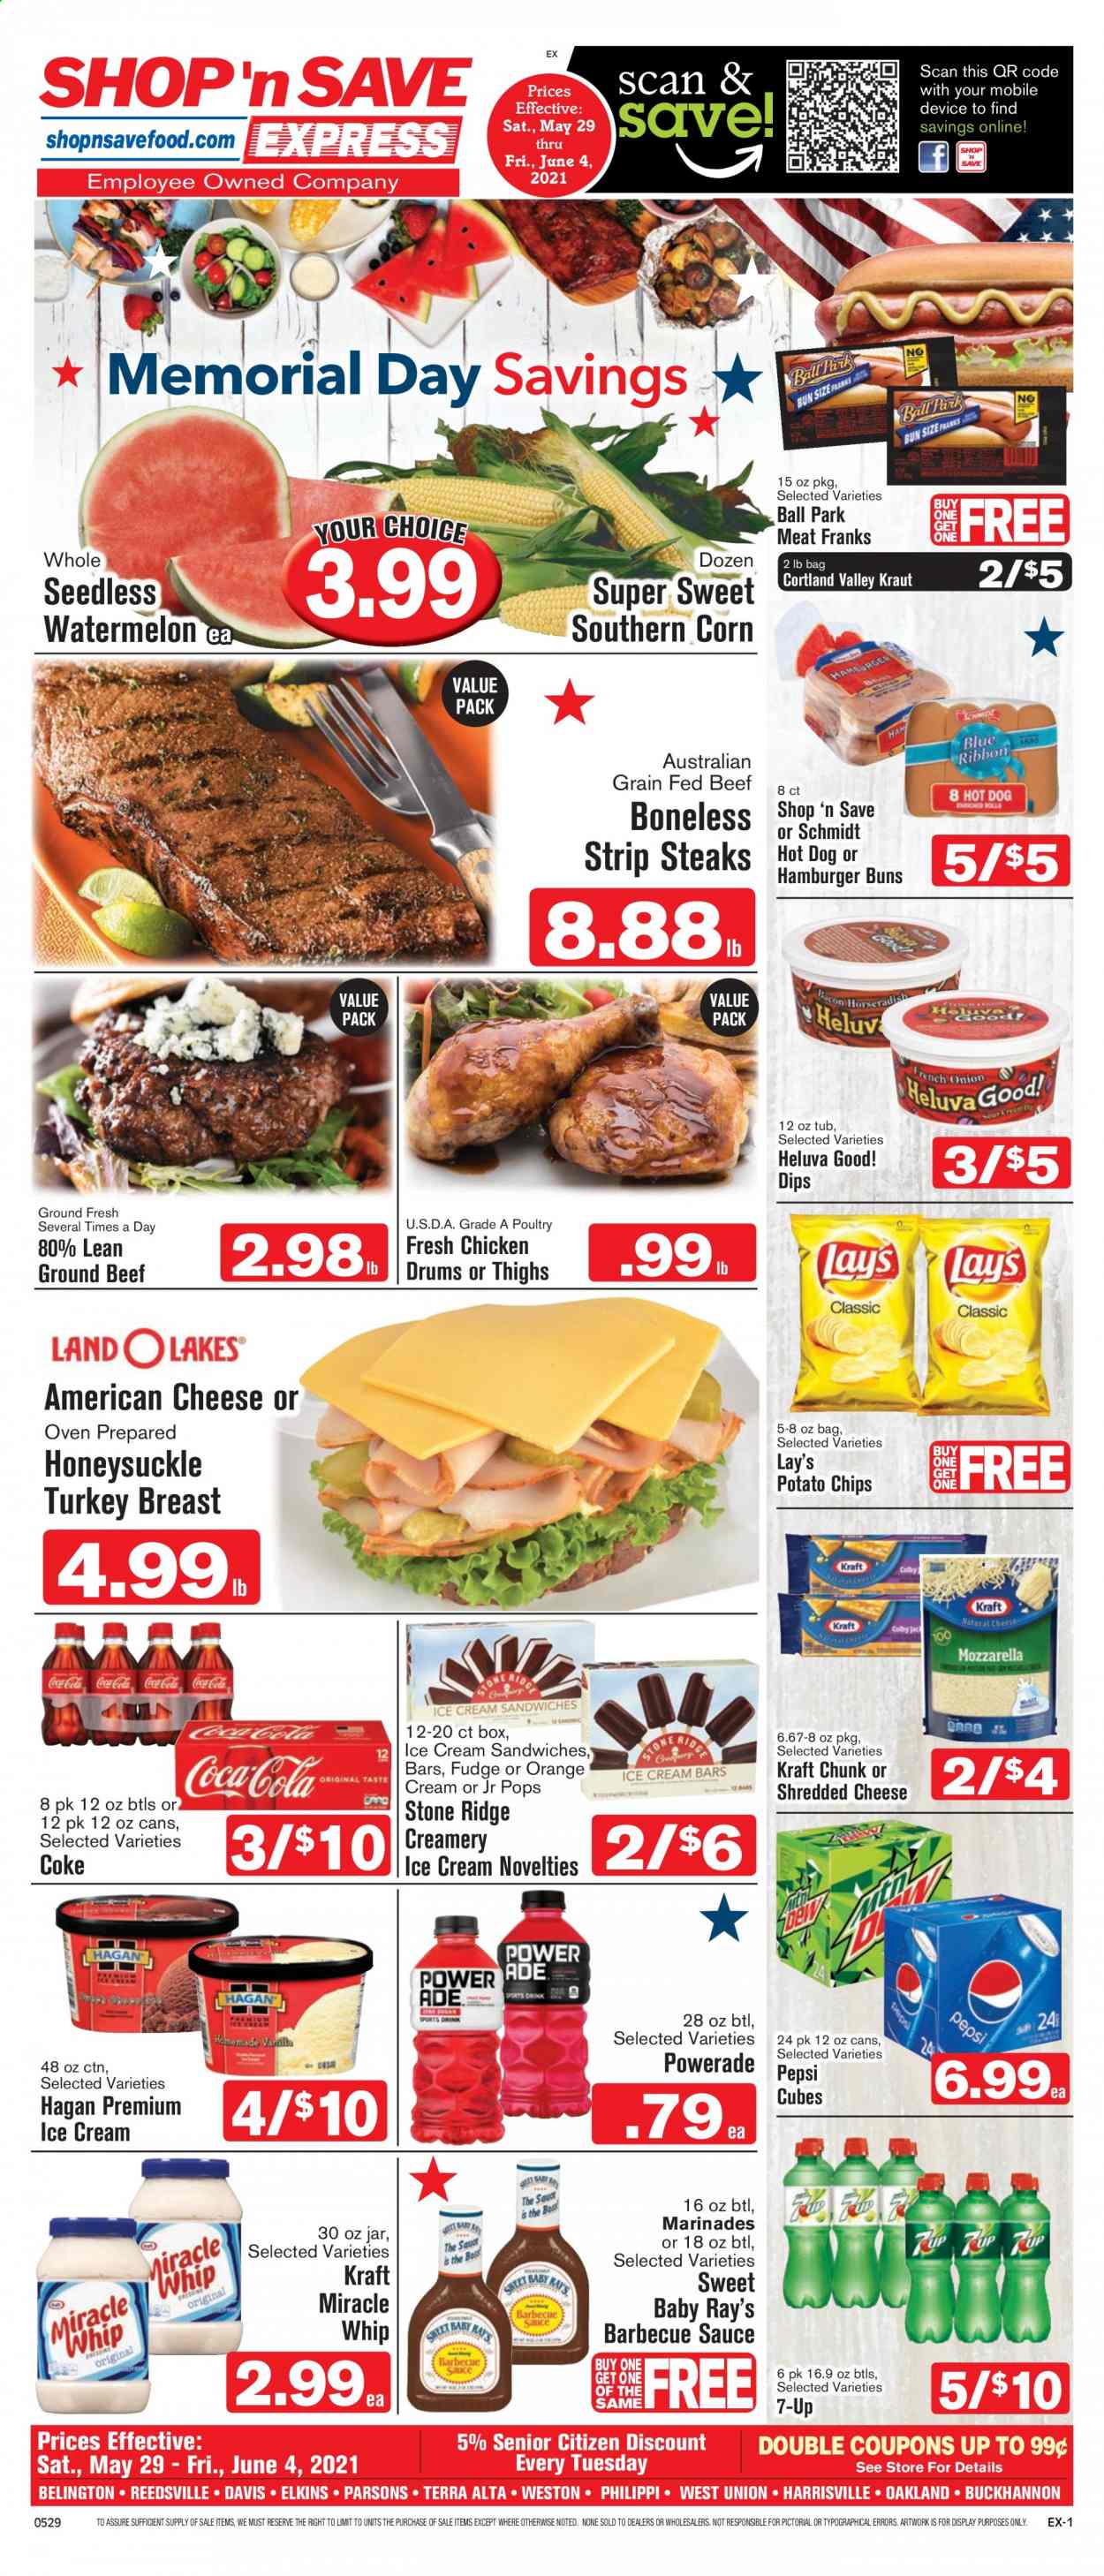 thumbnail - Shop ‘n Save Express Flyer - 05/29/2021 - 06/04/2021 - Sales products - buns, burger buns, corn, watermelon, oranges, turkey breast, beef meat, ground beef, steak, striploin steak, hot dog, sauce, Kraft®, american cheese, shredded cheese, Miracle Whip, ice cream, ice cream sandwich, fudge, potato chips, chips, Lay’s, BBQ sauce, Powerade, Pepsi, 7UP. Page 1.